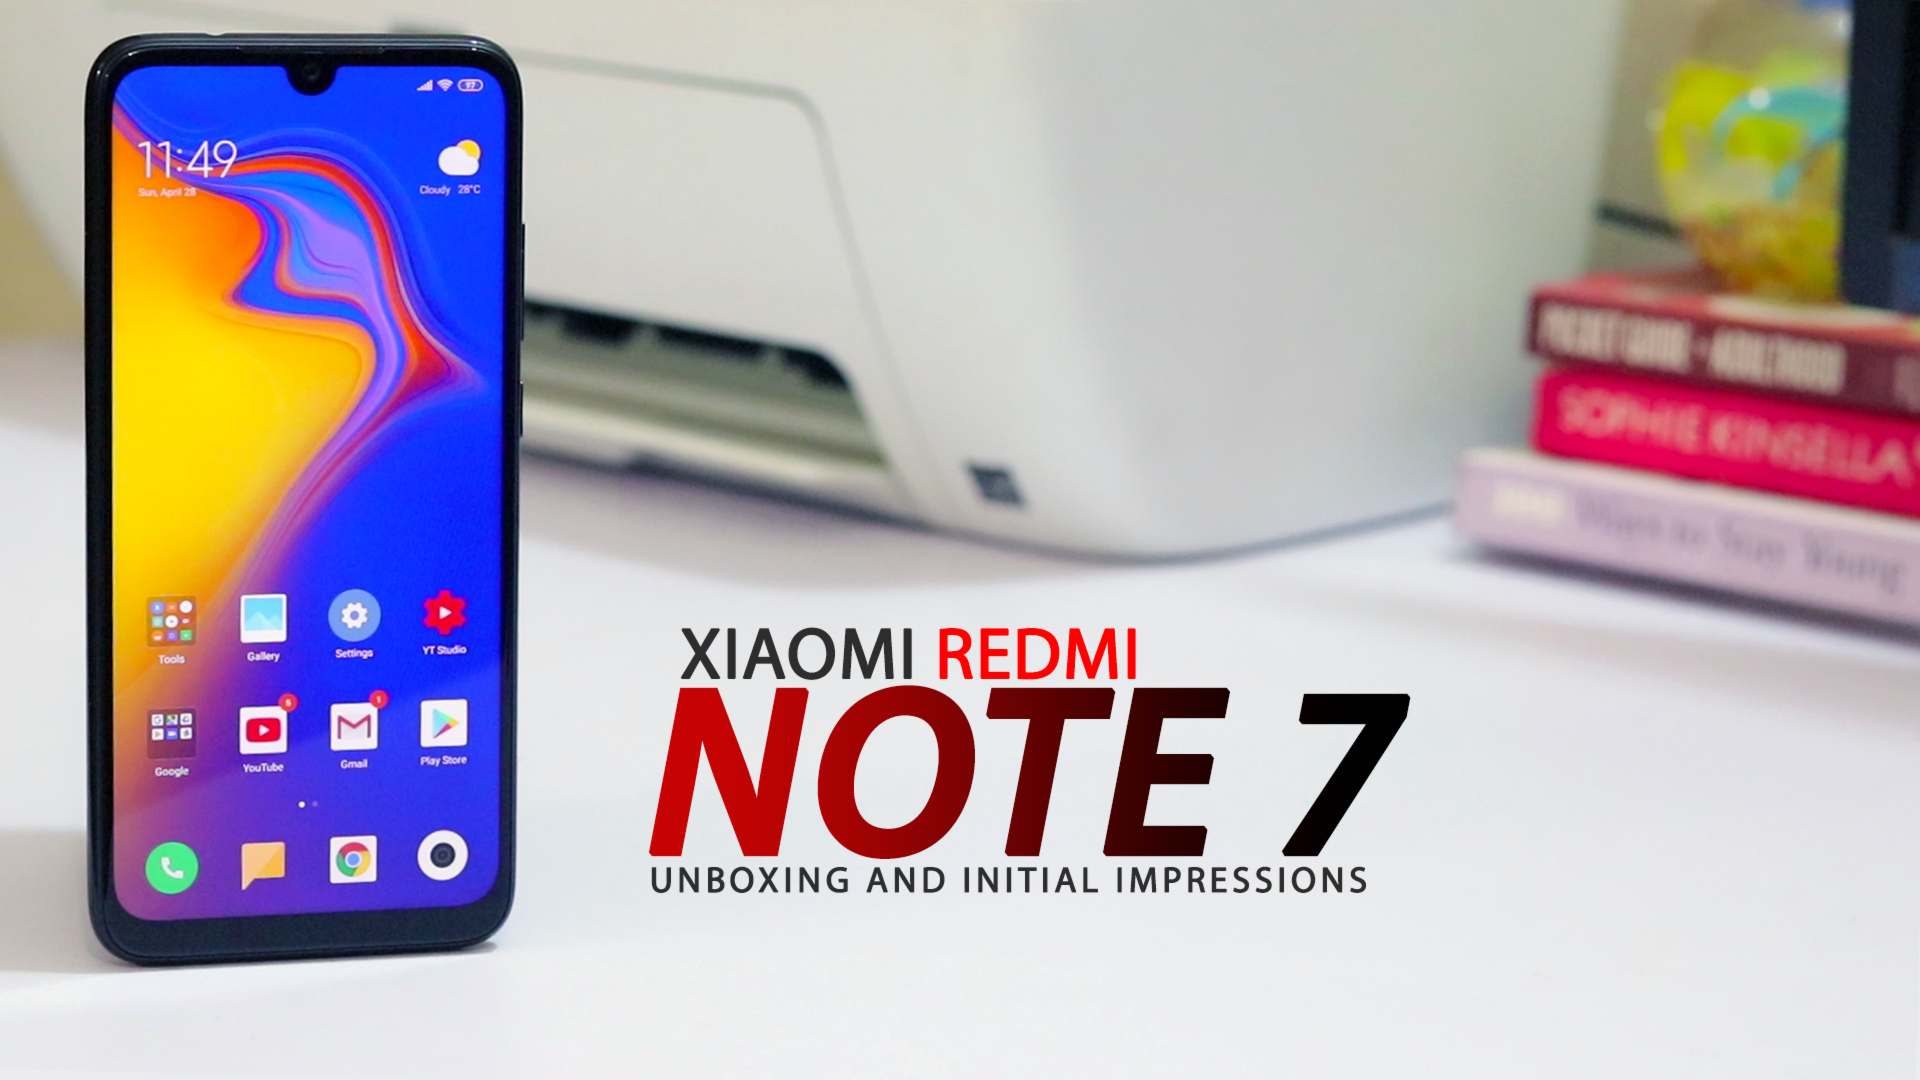 Xiaomi Redmi Note 7 Unboxing and Review – Other smartphone brands better sit up